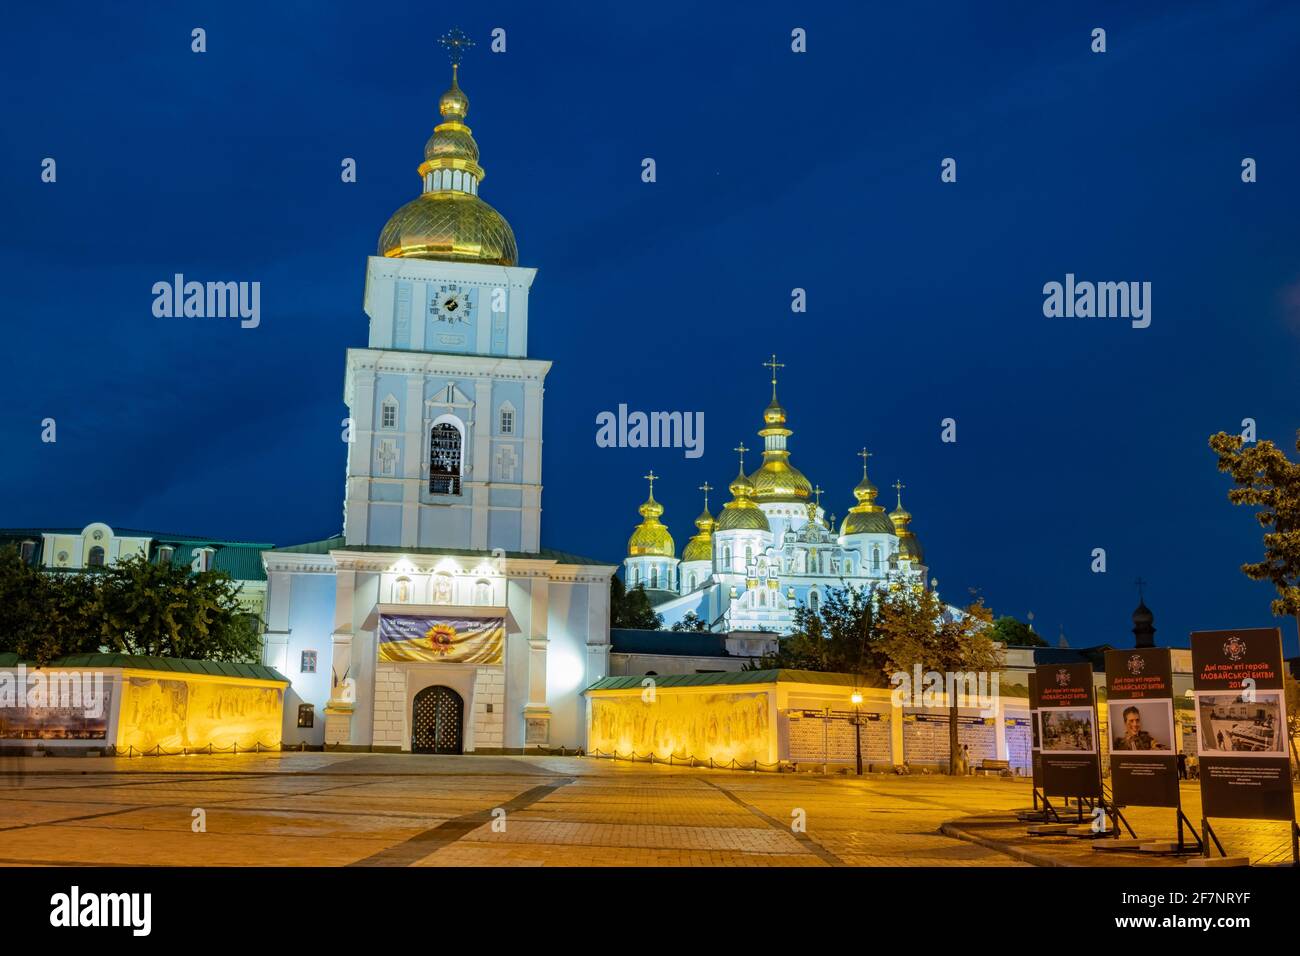 Blue hour shot of Mykhailivska Square and St Michaels Golden Domed Monastery in Kyiv Ukraine on a fall evening Stock Photo